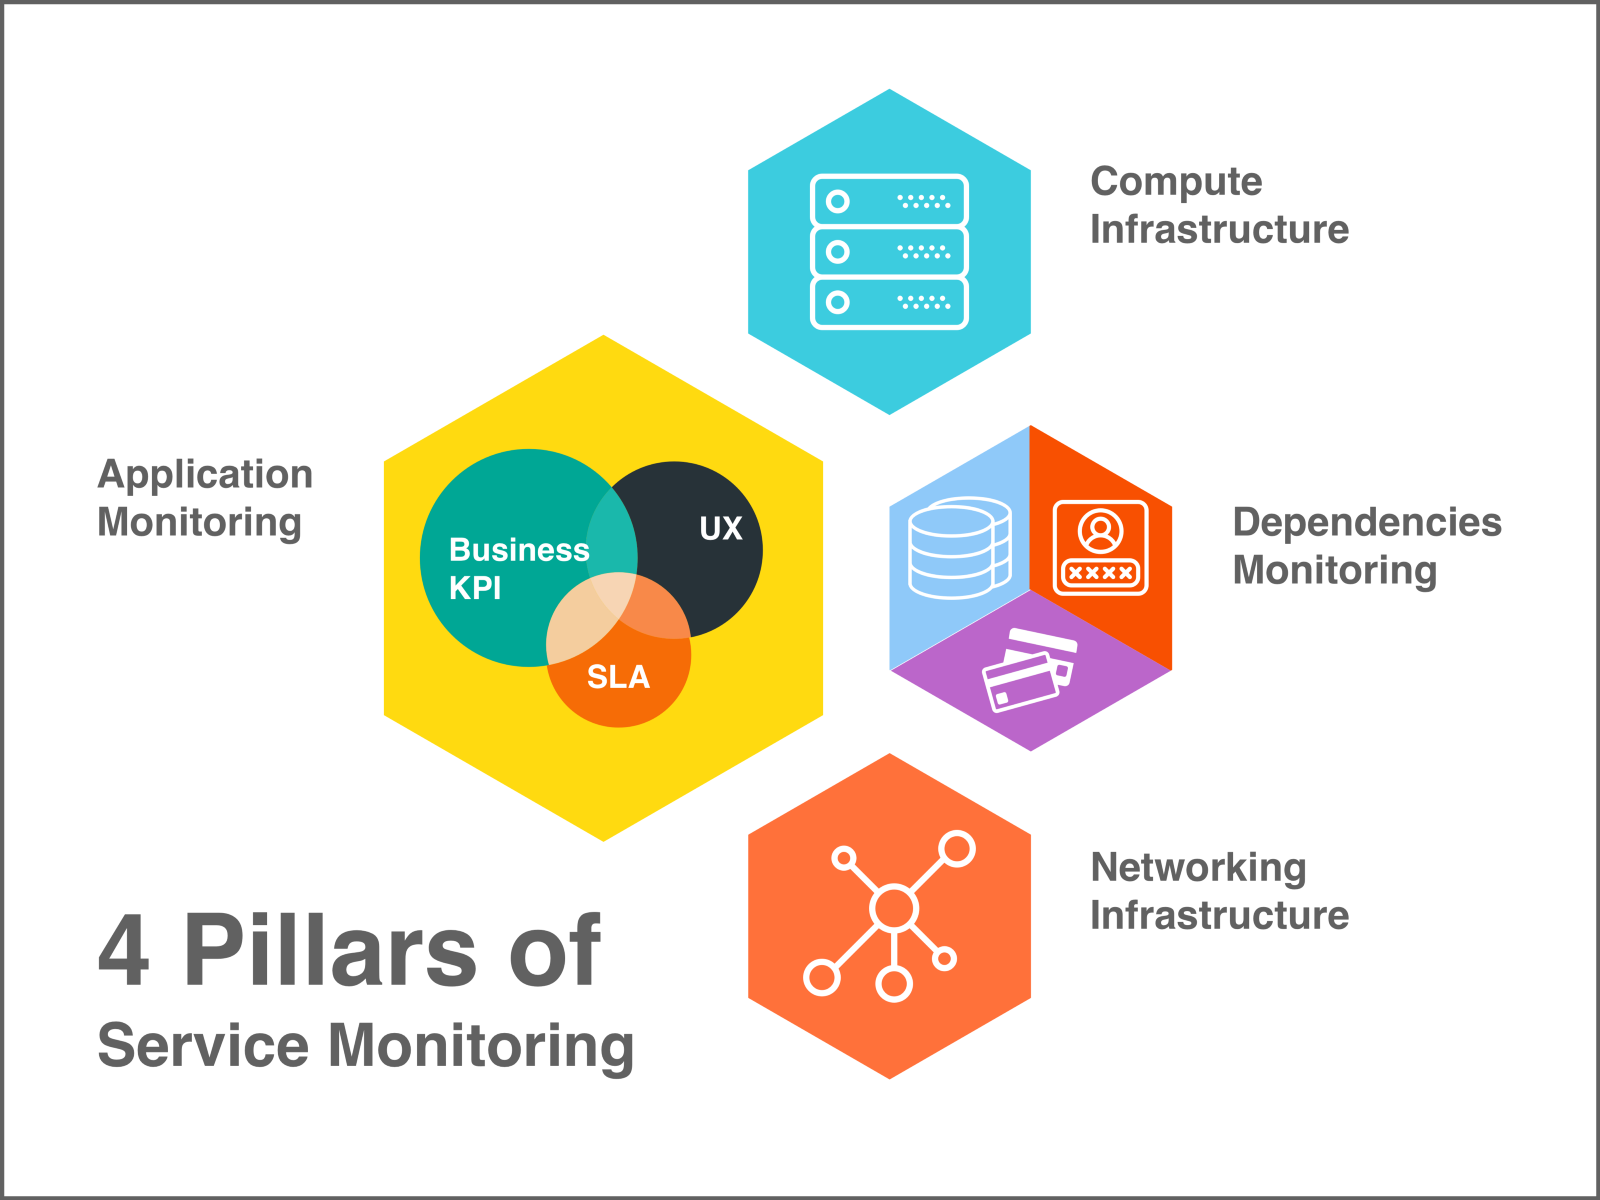  A diagram illustrating the four pillars of service monitoring: compute infrastructure, application monitoring, dependencies monitoring, and network infrastructure.